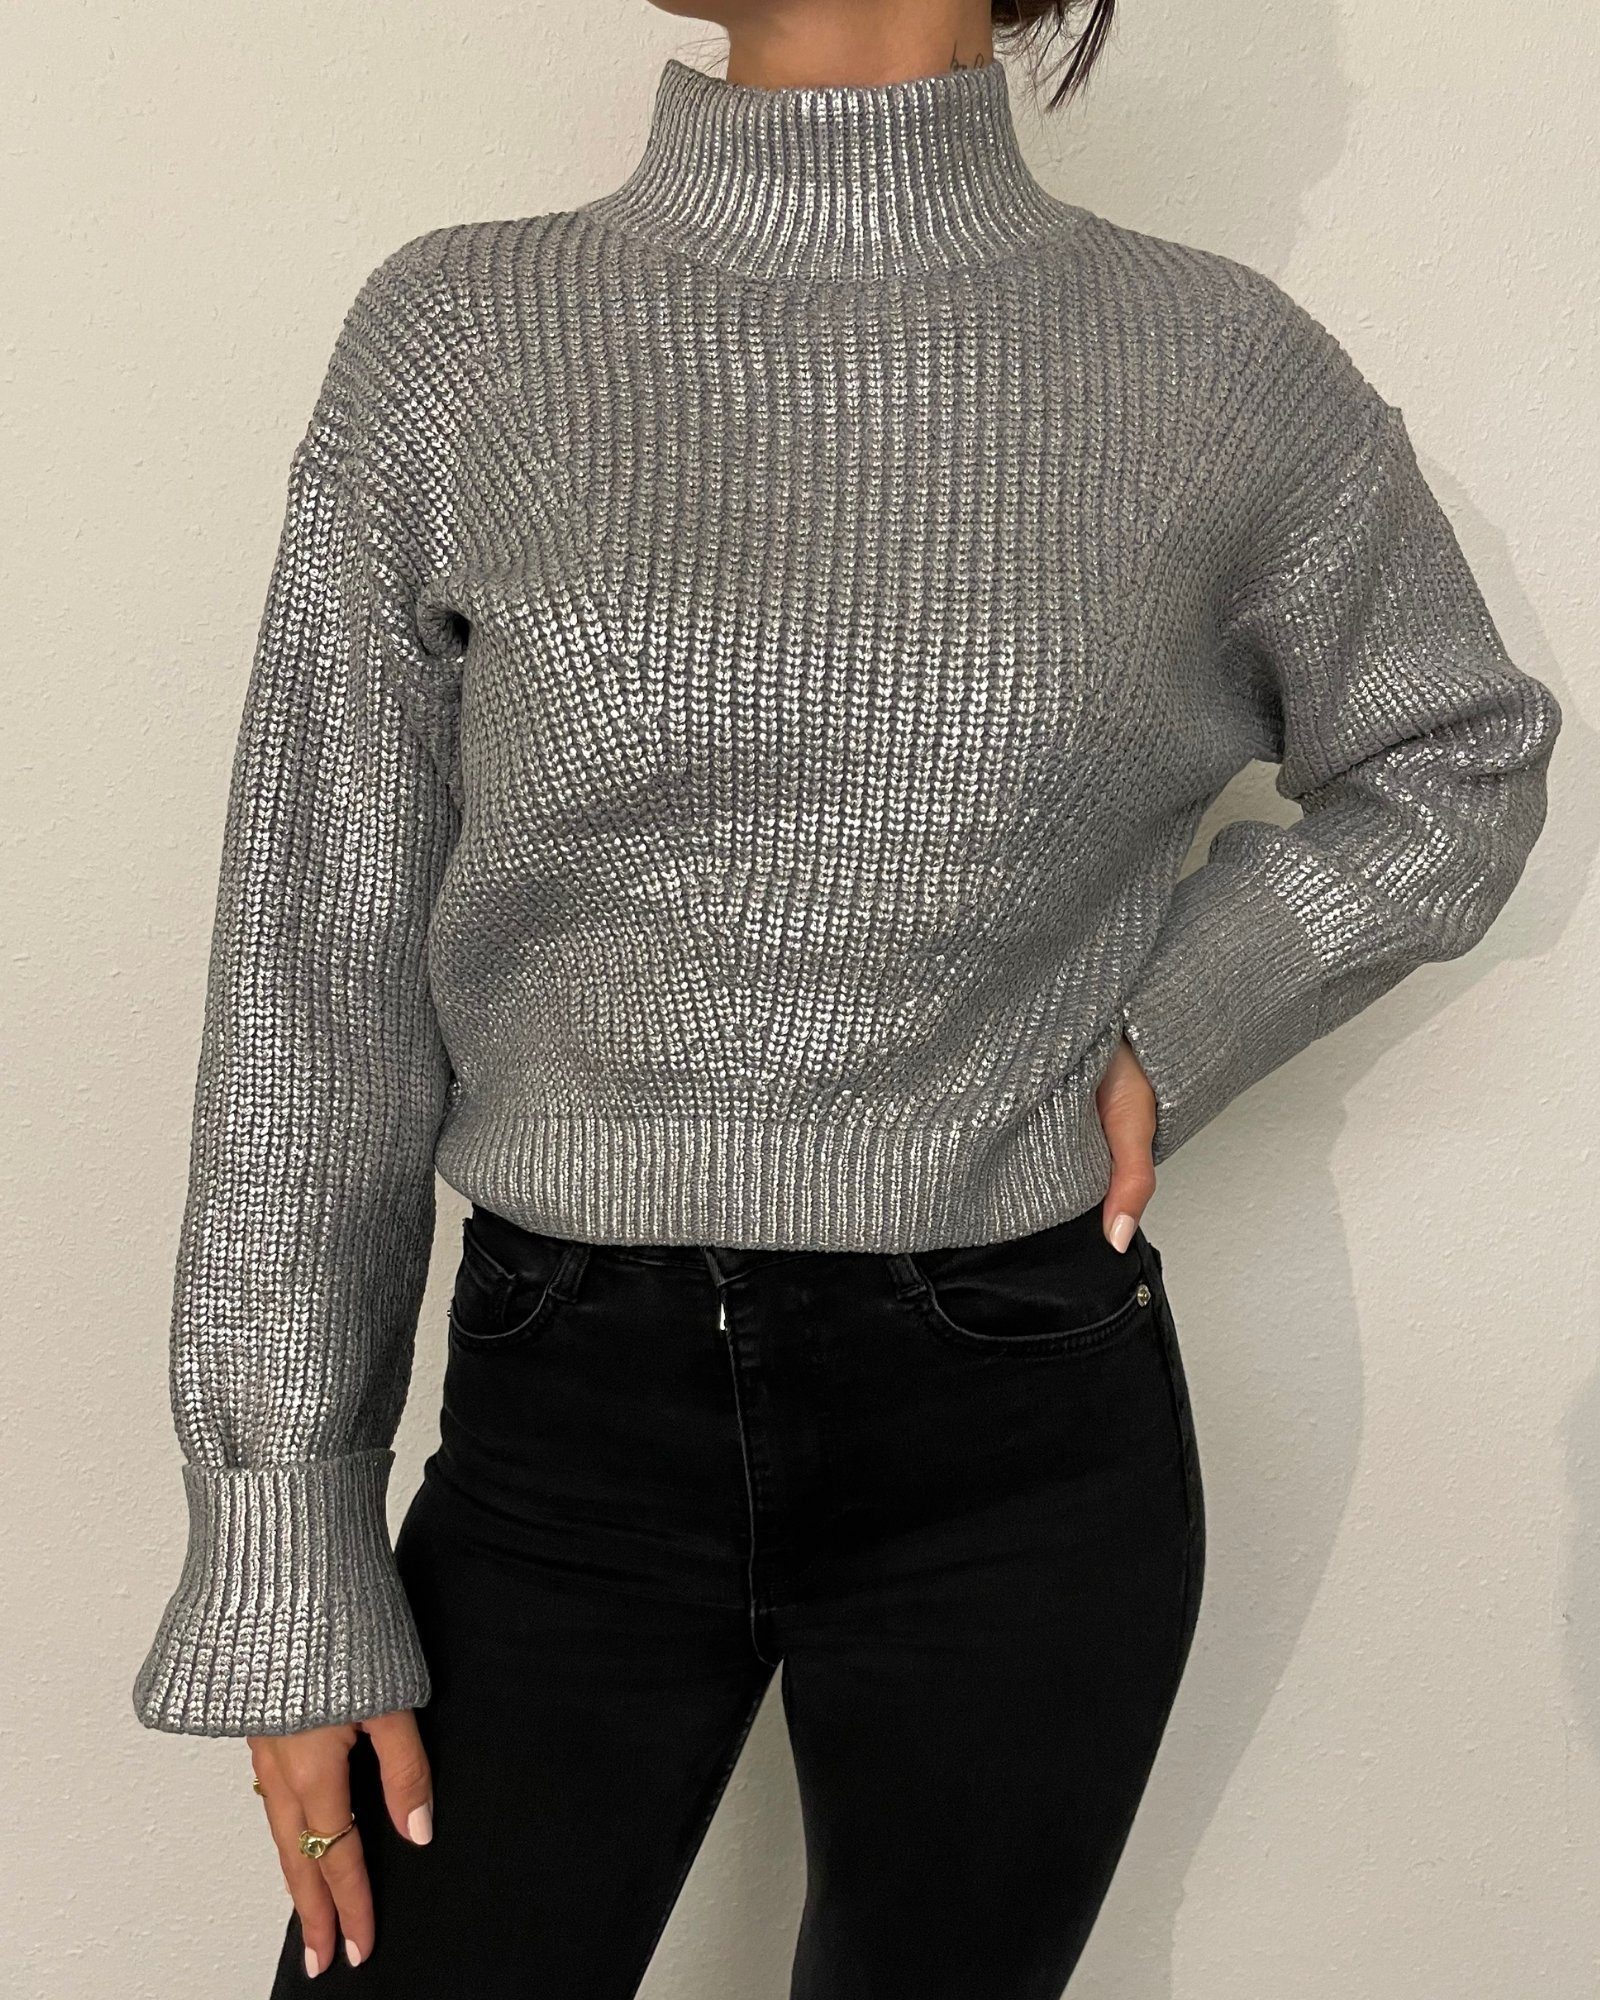 ITALY Strickpullover XS cropped passt - hier metallic SIZE - - M - NOEMI Gr. VIBES - langarm Pullover ONE